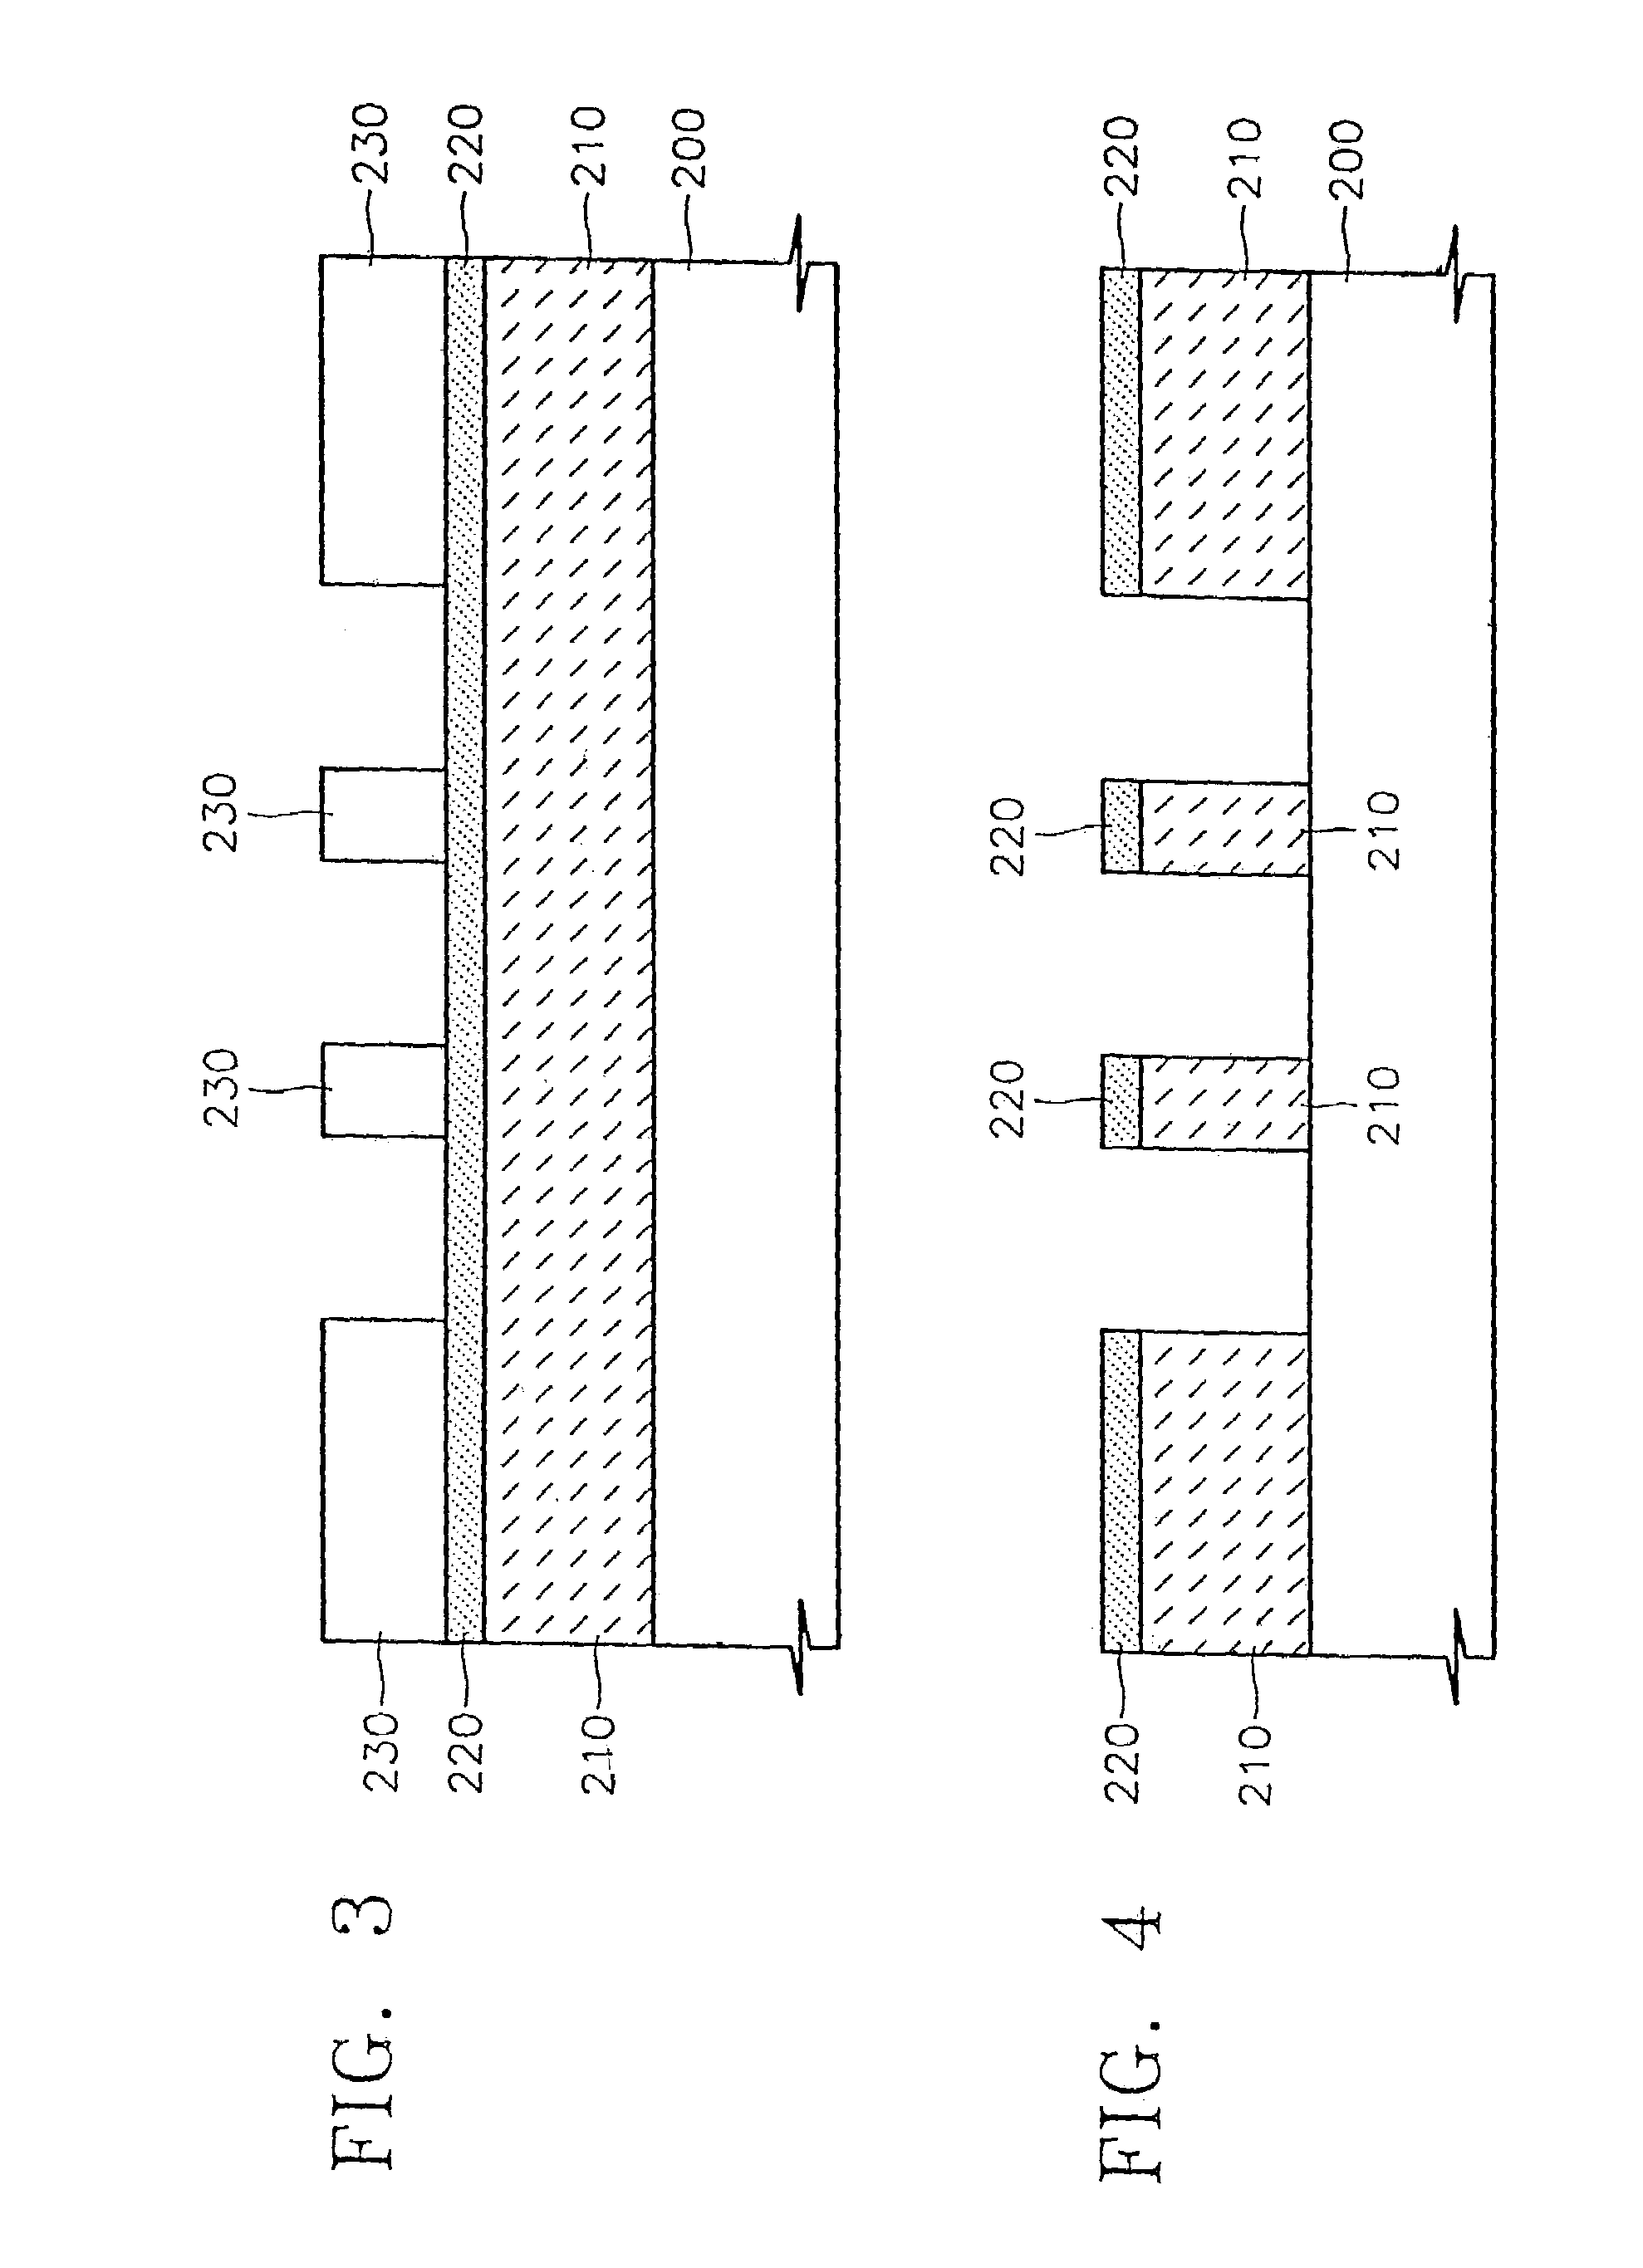 Method for fabricating capacitor array preventing crosstalk between adjacent capacitors in semiconductor device